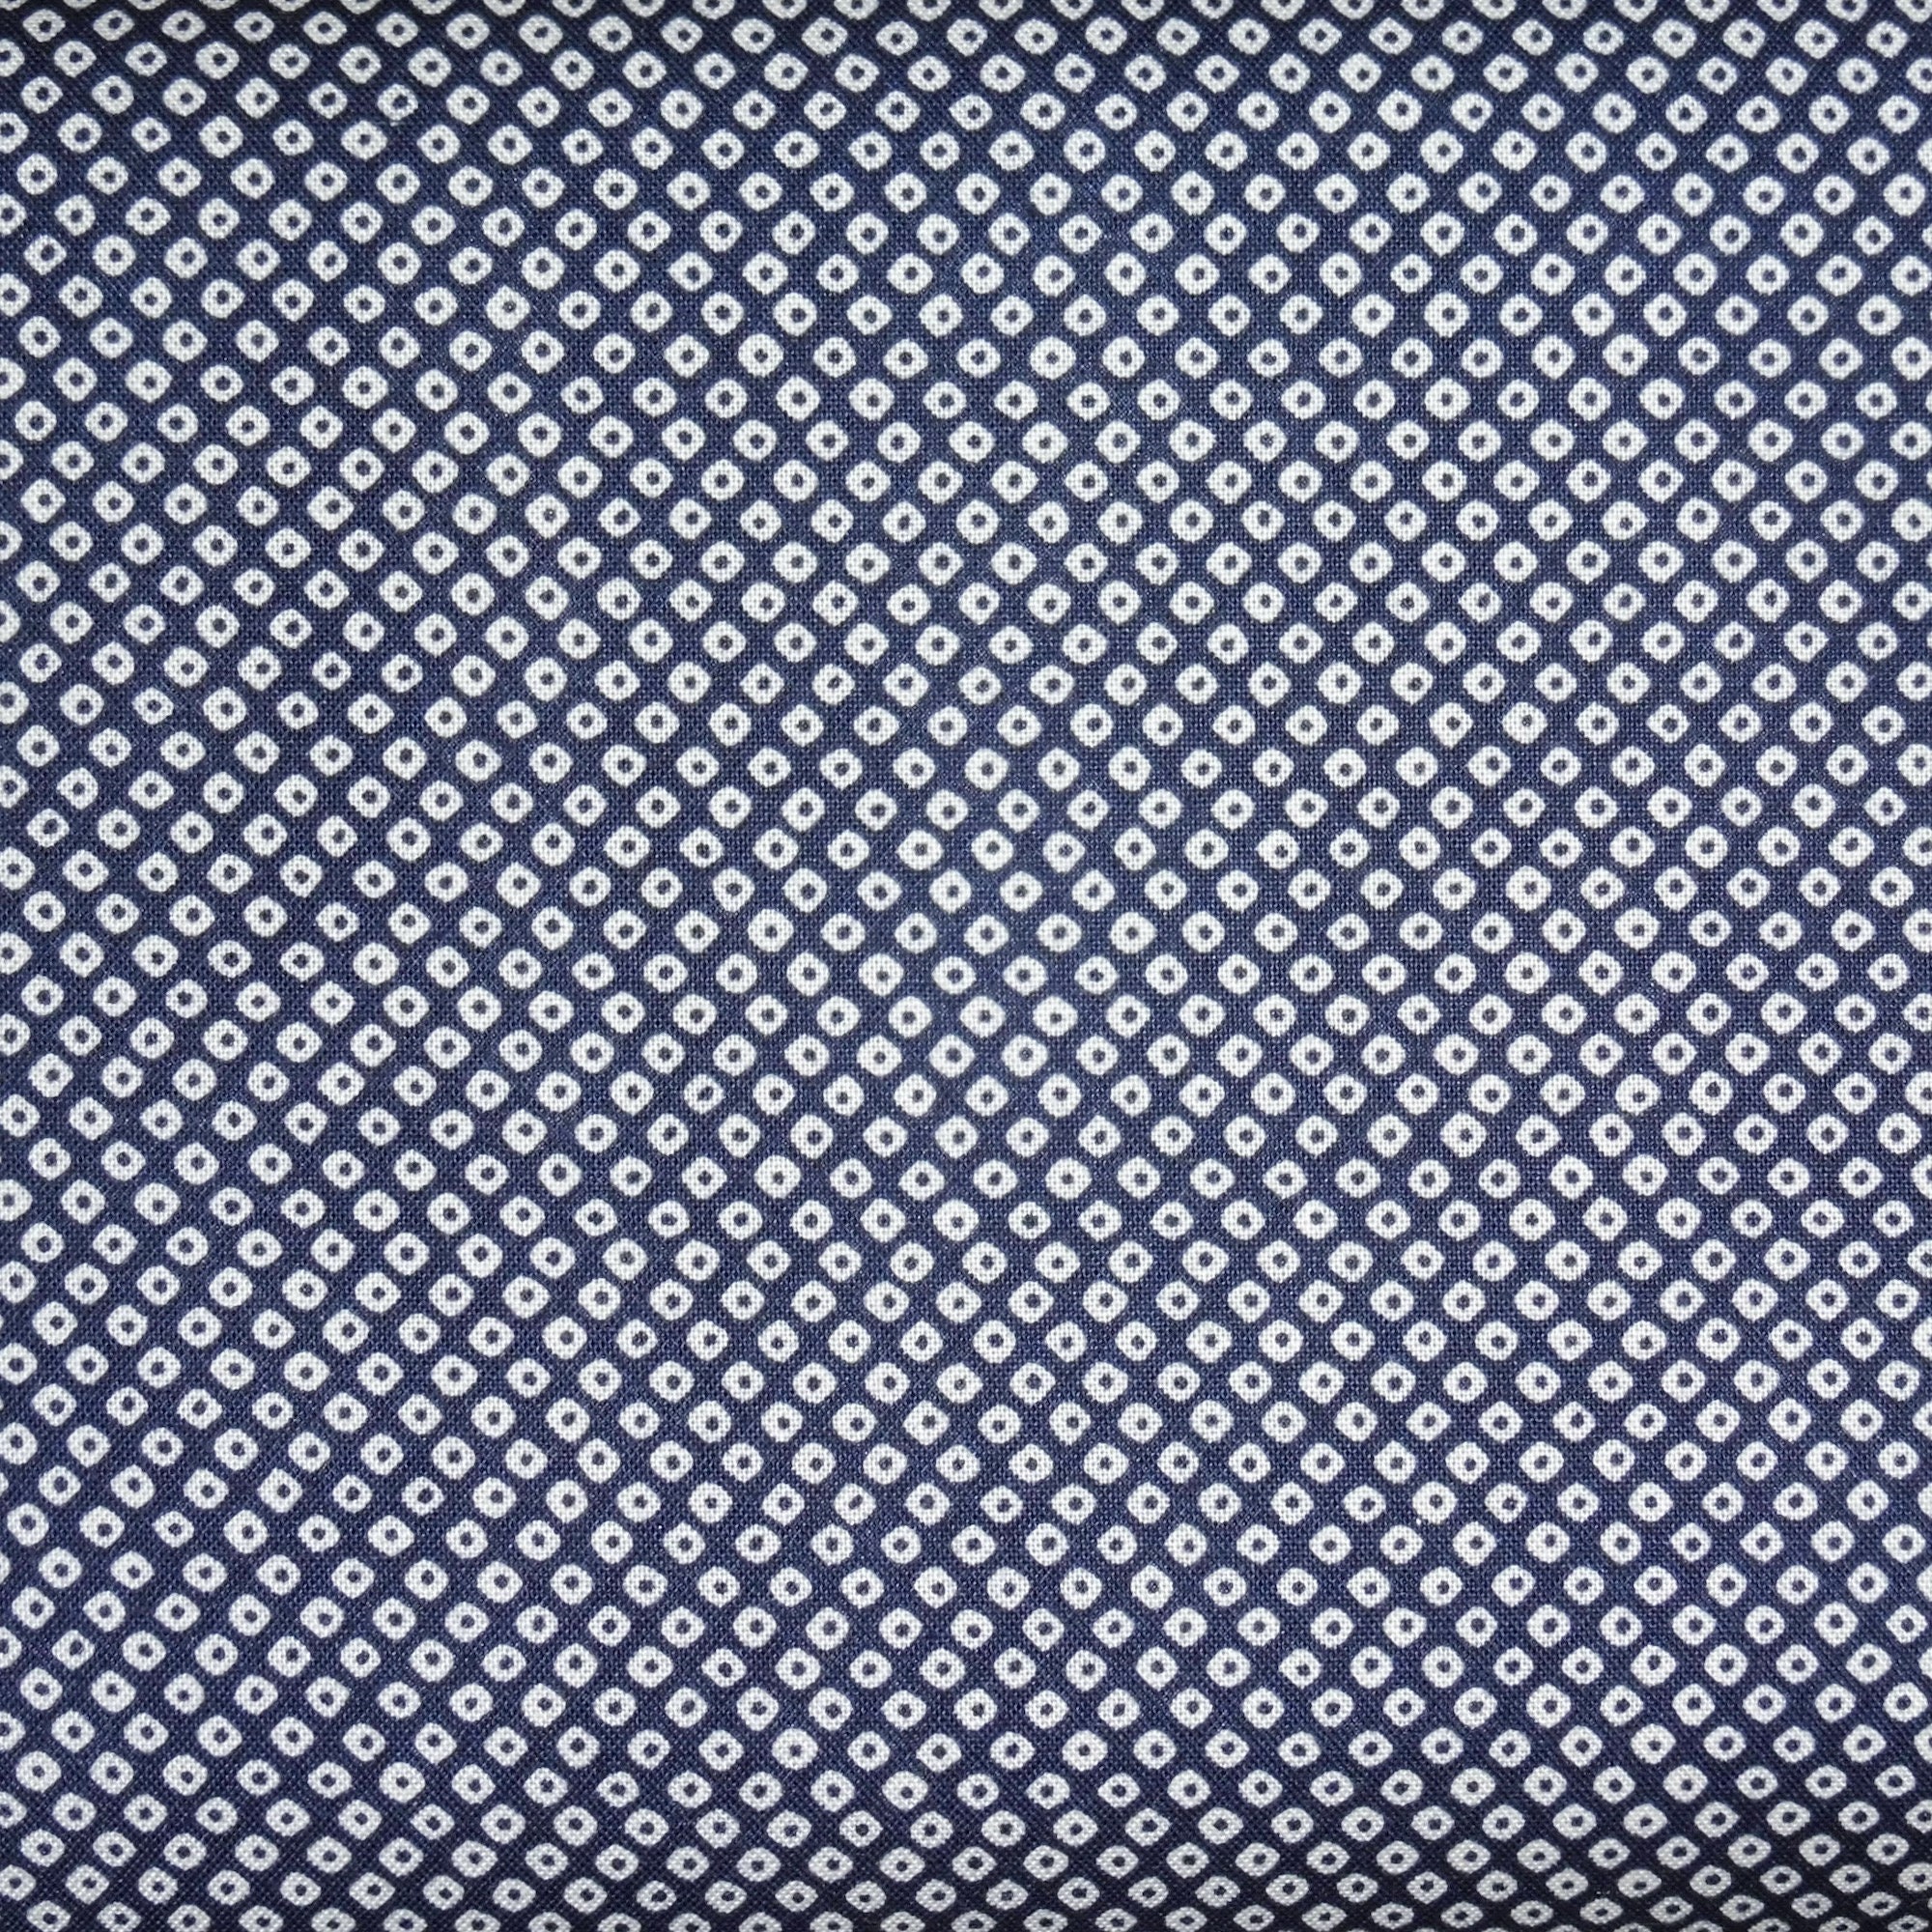 NAVY 21700-04 Embroidery Cloth, 100% Cotton, Lecien COSMO Embroidery  Fabric, Rich Textured in Wide Range of Colors 